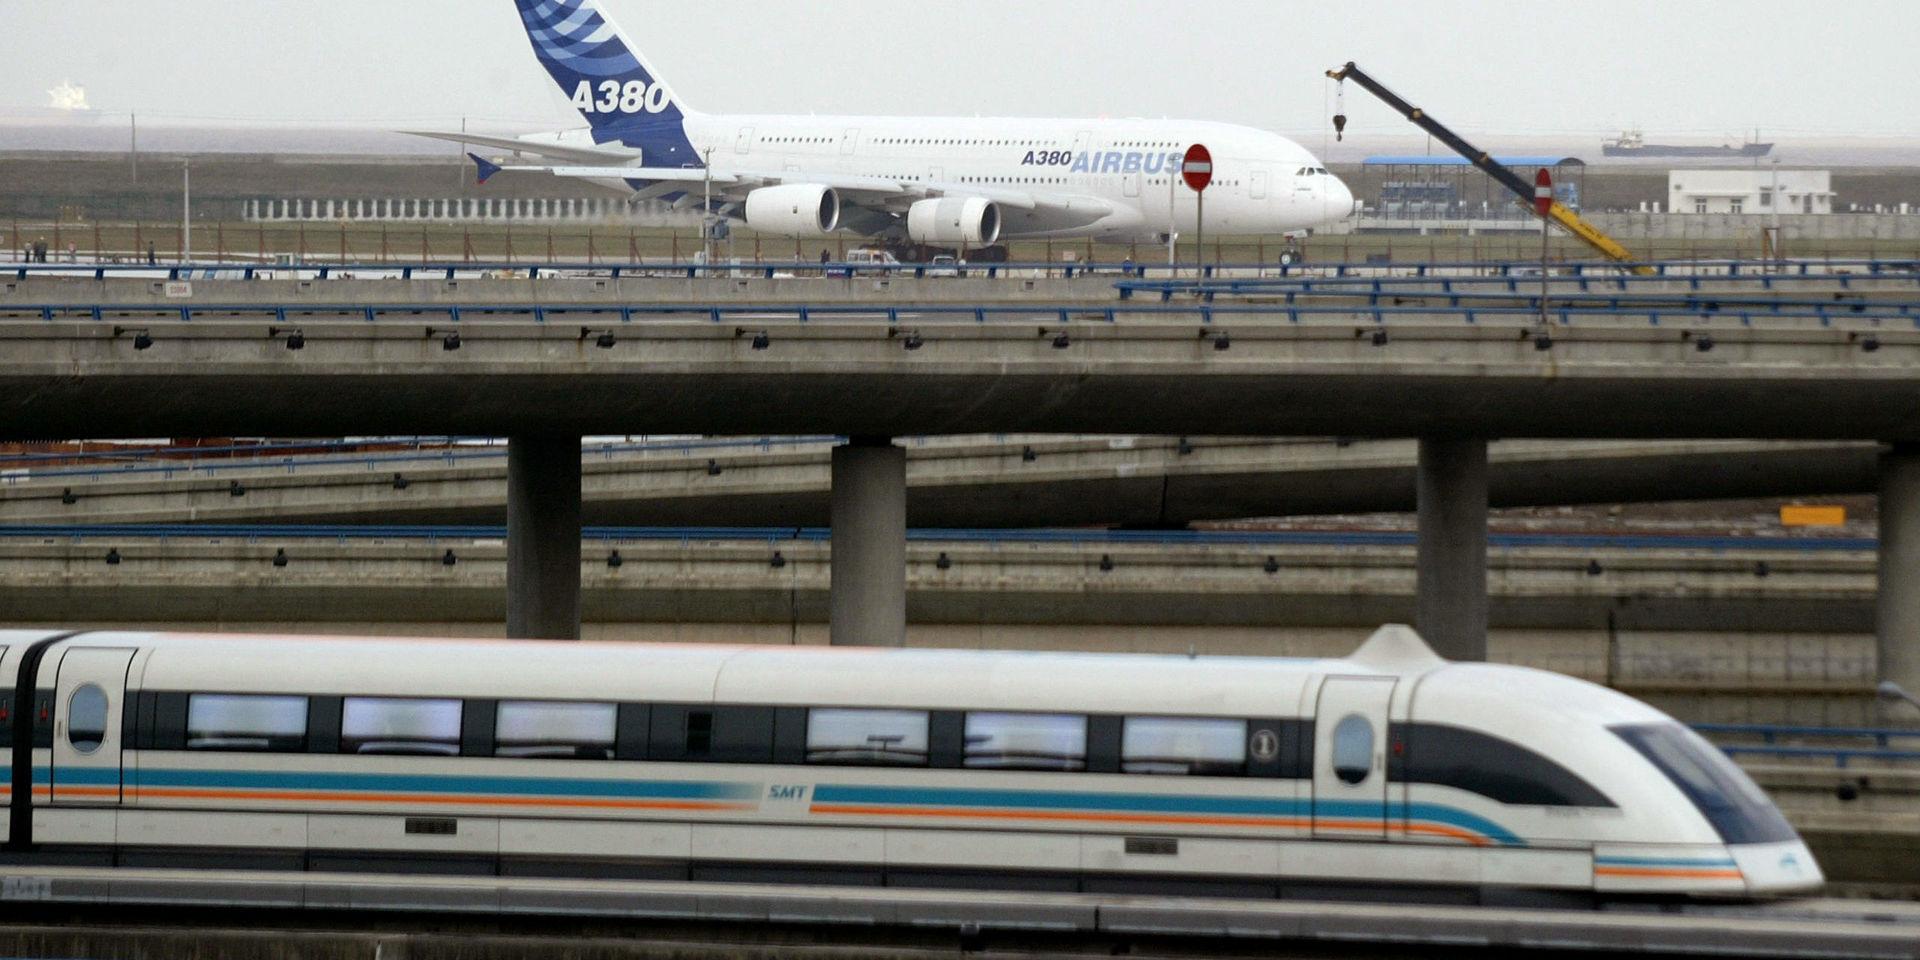 A maglev train runs past as a new Airbus A380 sits on the tarmac at Shanghai Pudong International Airport Friday Nov. 24, 2006 in Shanghai, China. The Airbus A380 superjumbo flew home Friday after stopovers in three of China&apos;s biggest cities, visits symbolizing the company&apos;s ambitions in the booming Chinese market, where the outlook for the colossal jet is mixed. (AP Photo/Color China Photo) ** CHINA OUT **